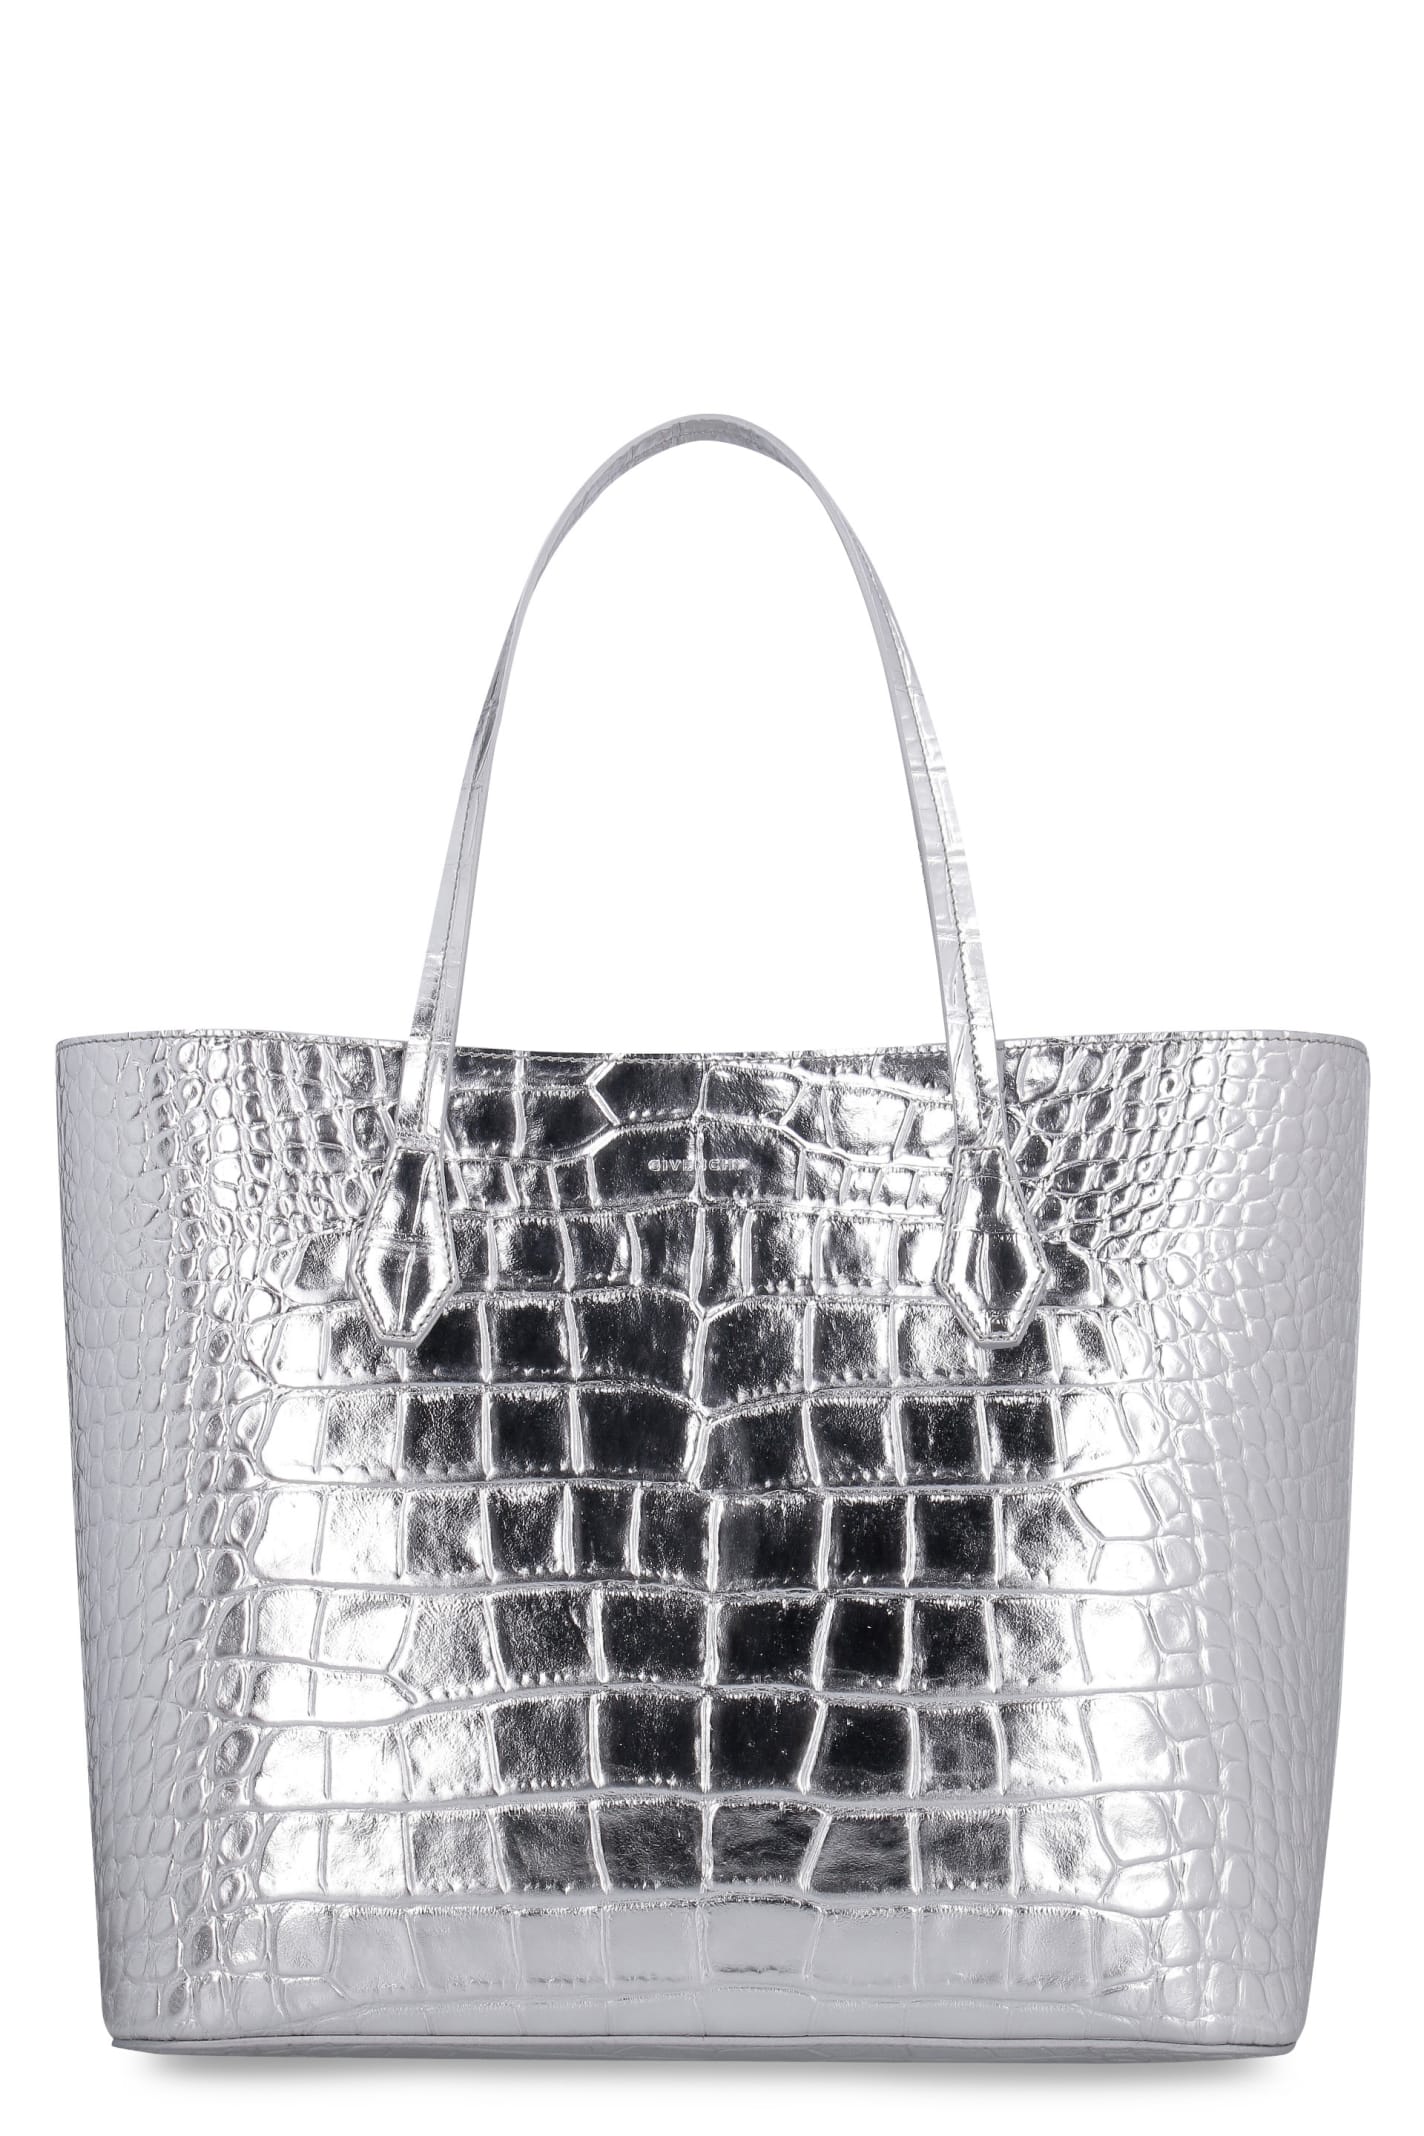 Givenchy Wing Croco-print Leather Bag